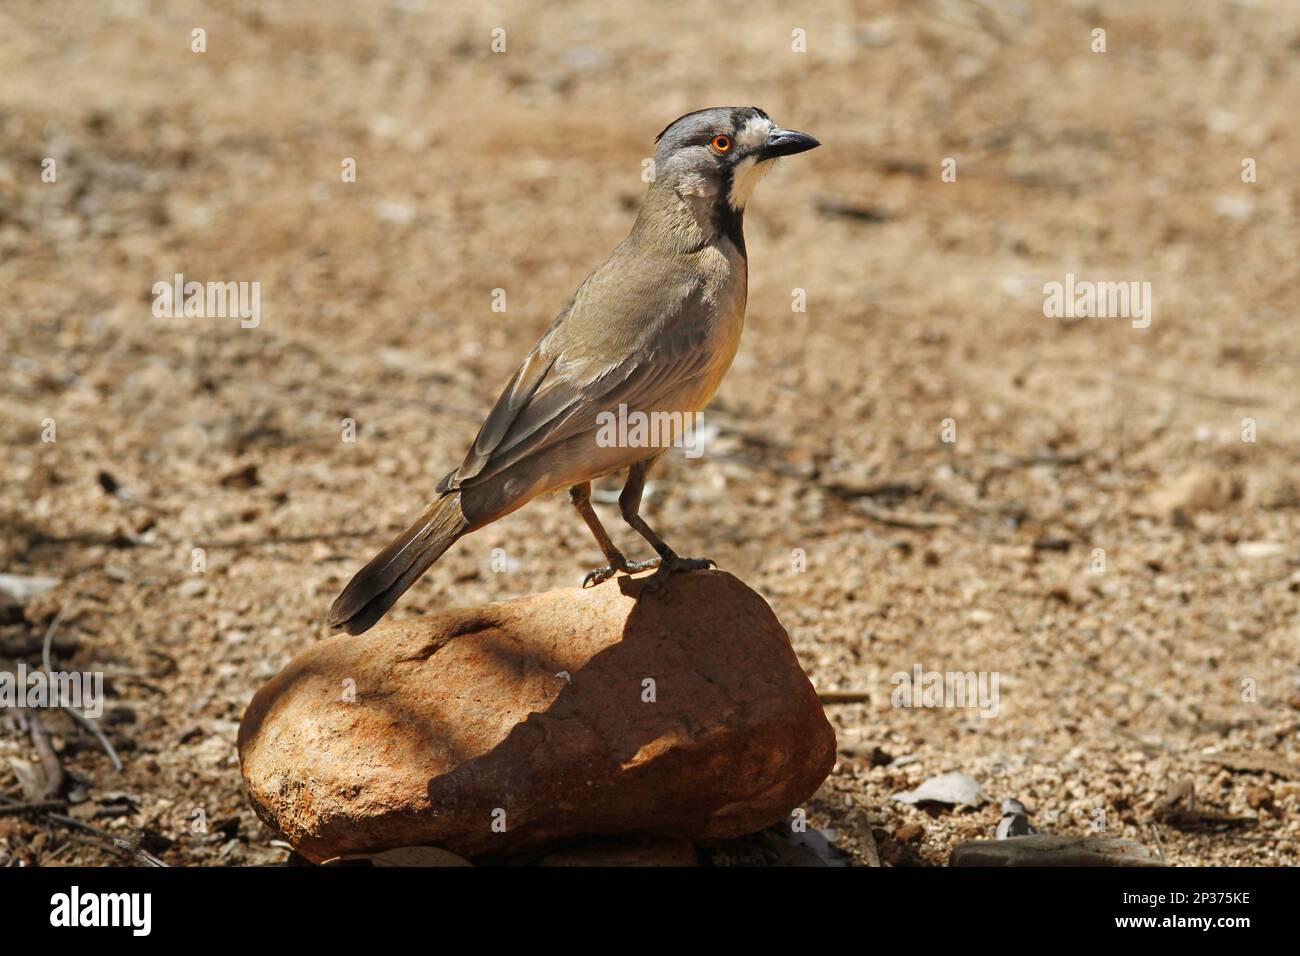 Crested Bellbird (Oreoica gutturalis) adult, perched on rock, Red Centre, Northern Territory, Australia Stock Photo